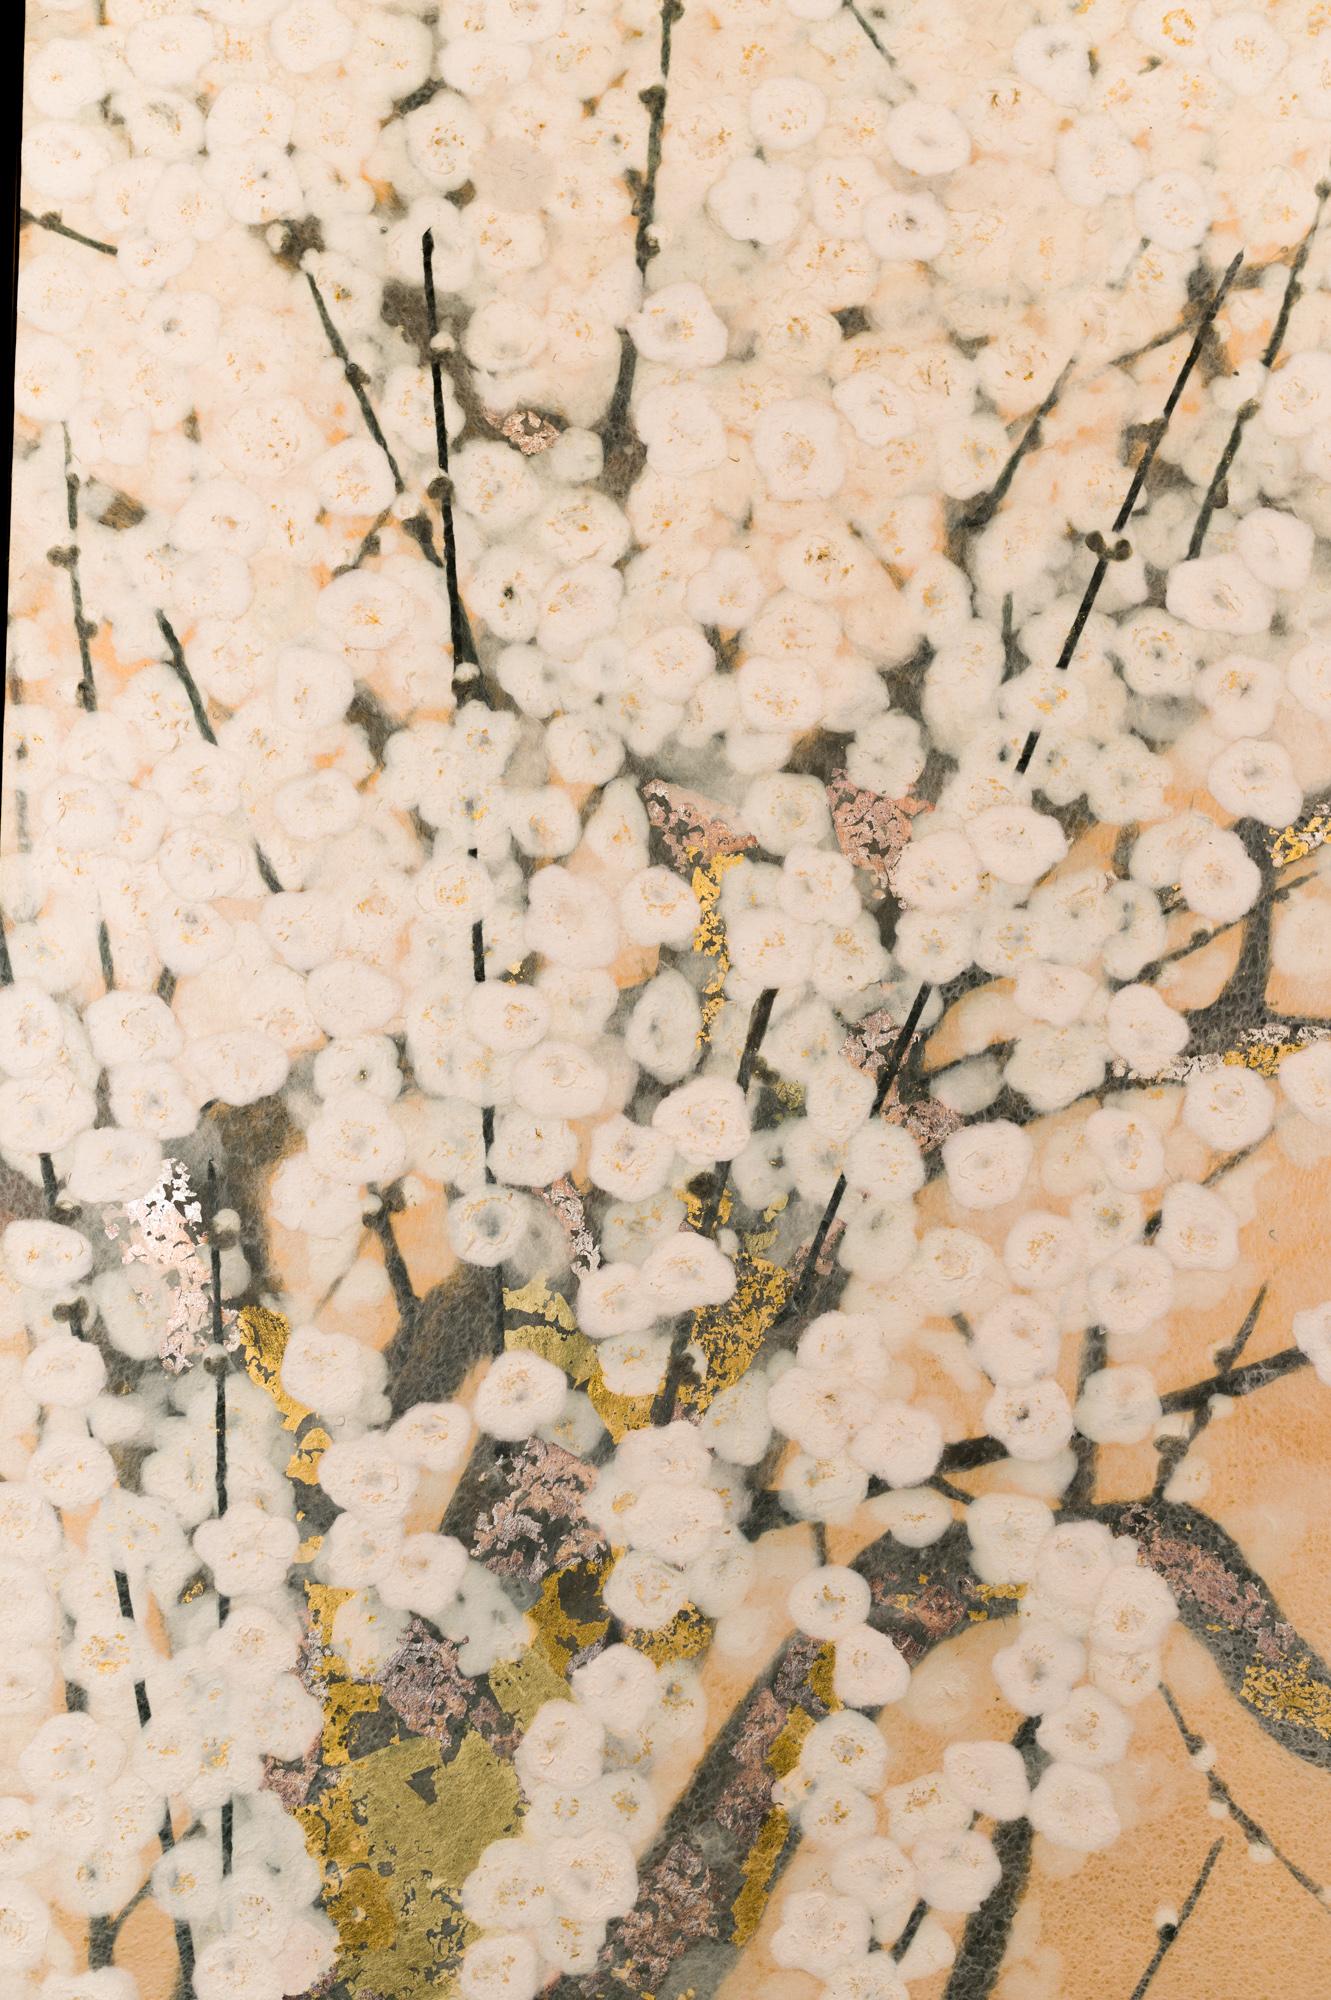 A blooming white plum tree made entirely of carefully arranged mulberry paper fibers in a Japanese art practice called Obara. Accented with gold dust. Incredible craftsmanship and a wonderful rendering of flowers and branches. Made by Yamauchi Issei